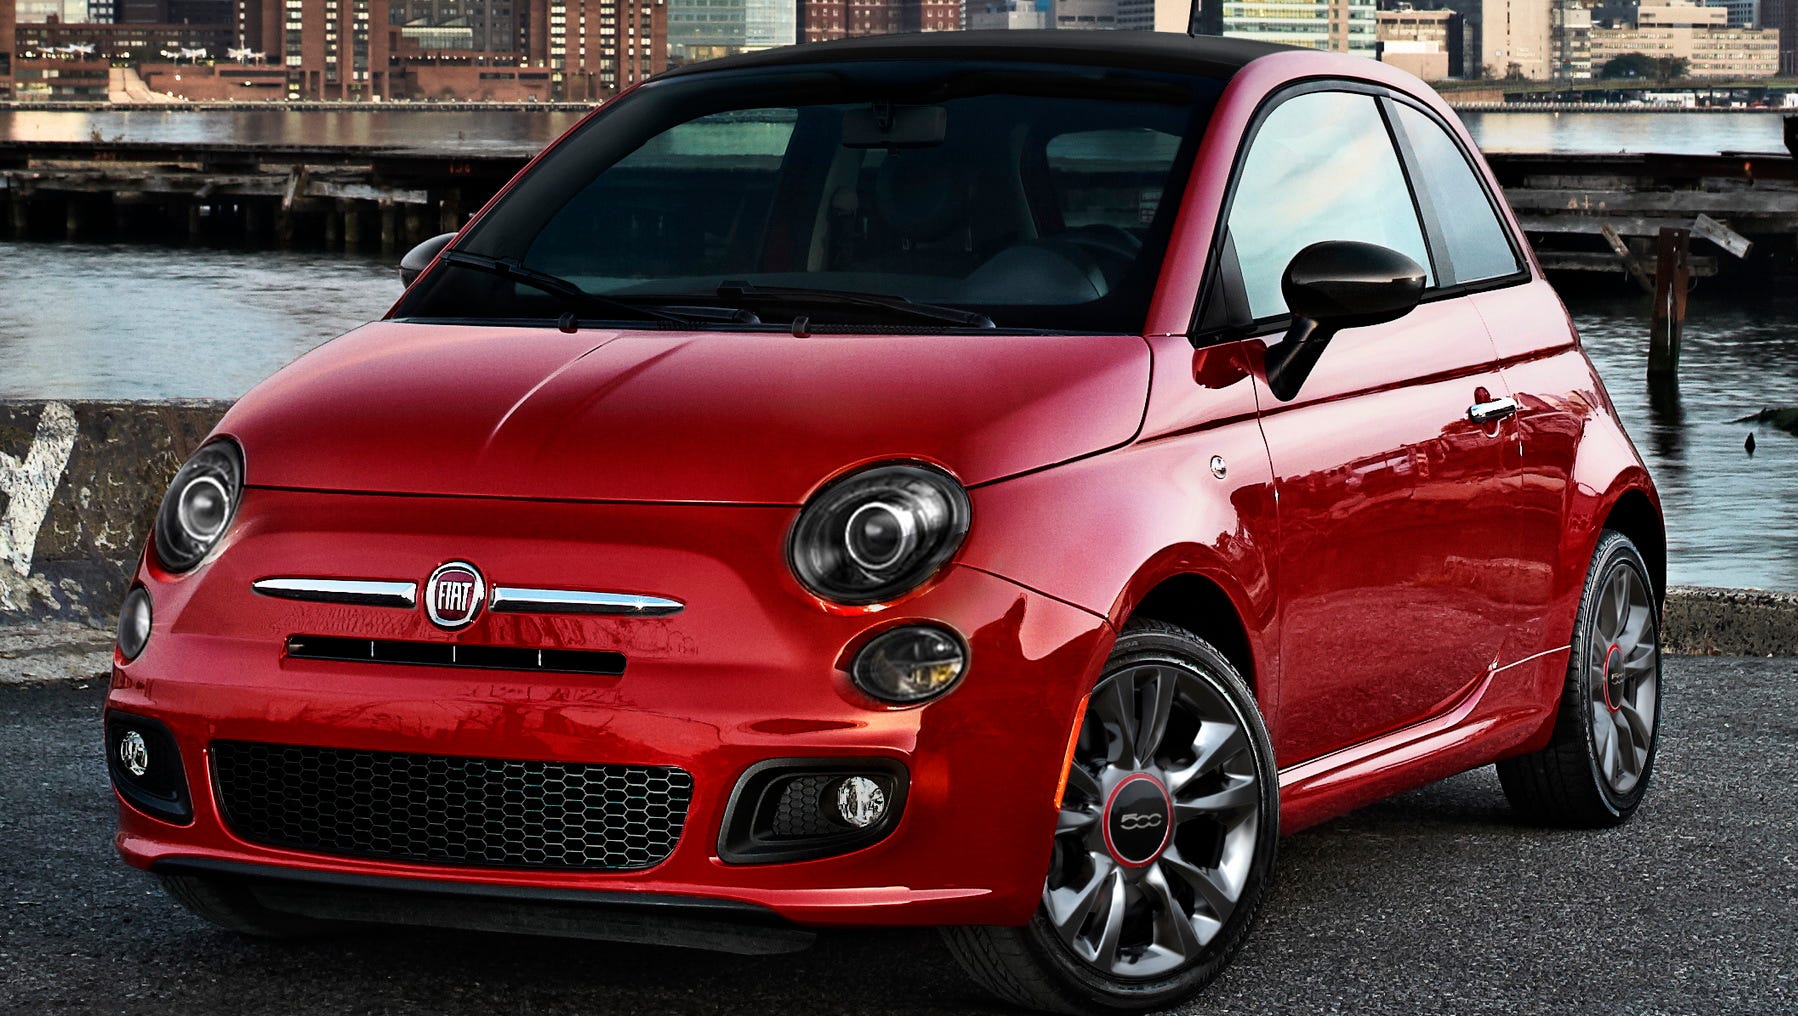 Auto review: 2017 Fiat 500 coupe is a timeless icon